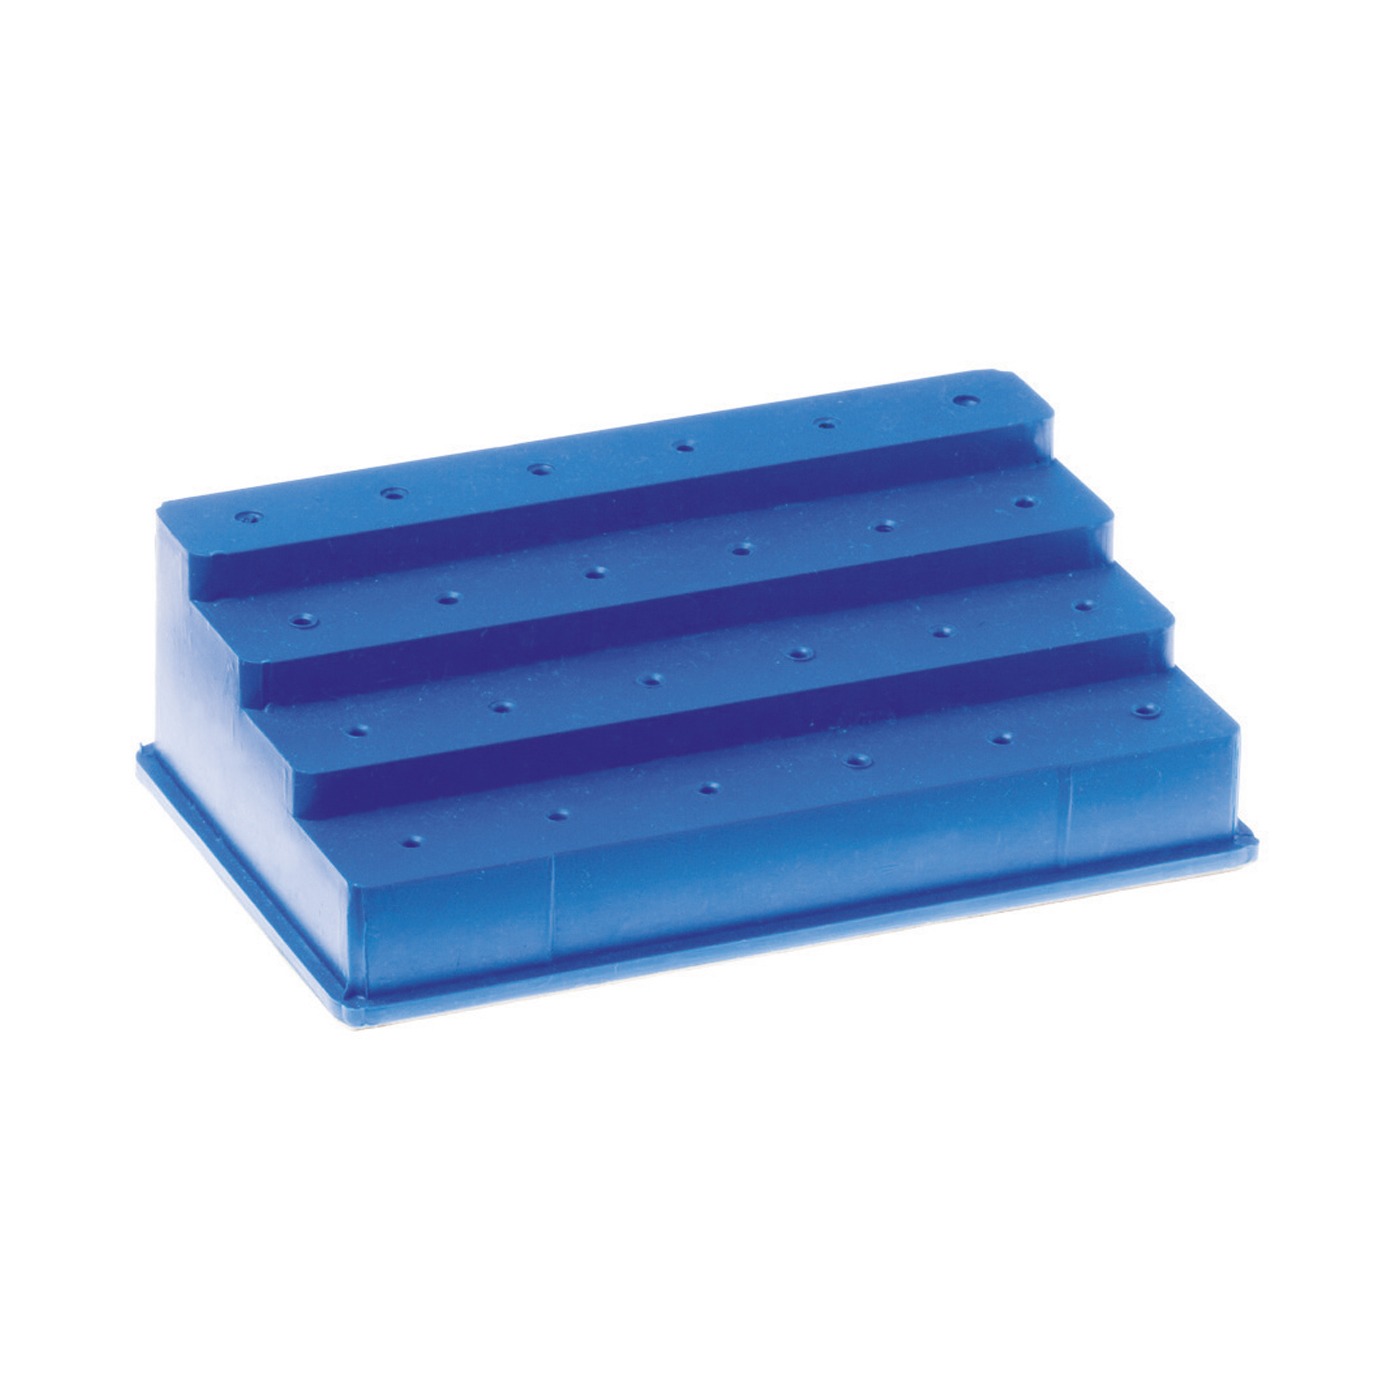 Tool Stand, Blue - 1 piece